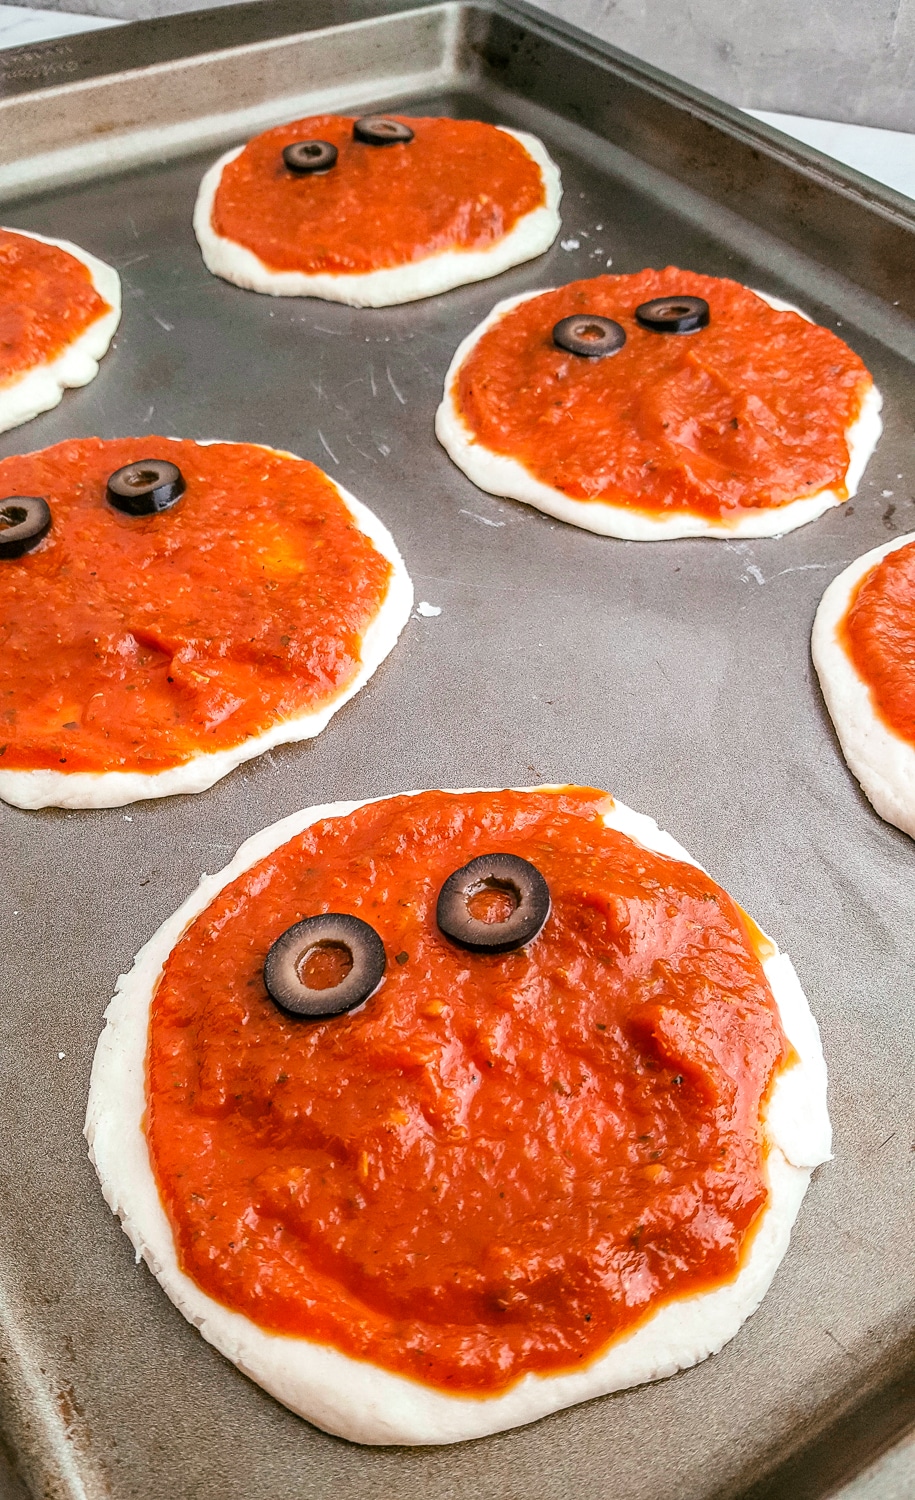 mummy pizza with tomato sauce and sliced olives for eyes